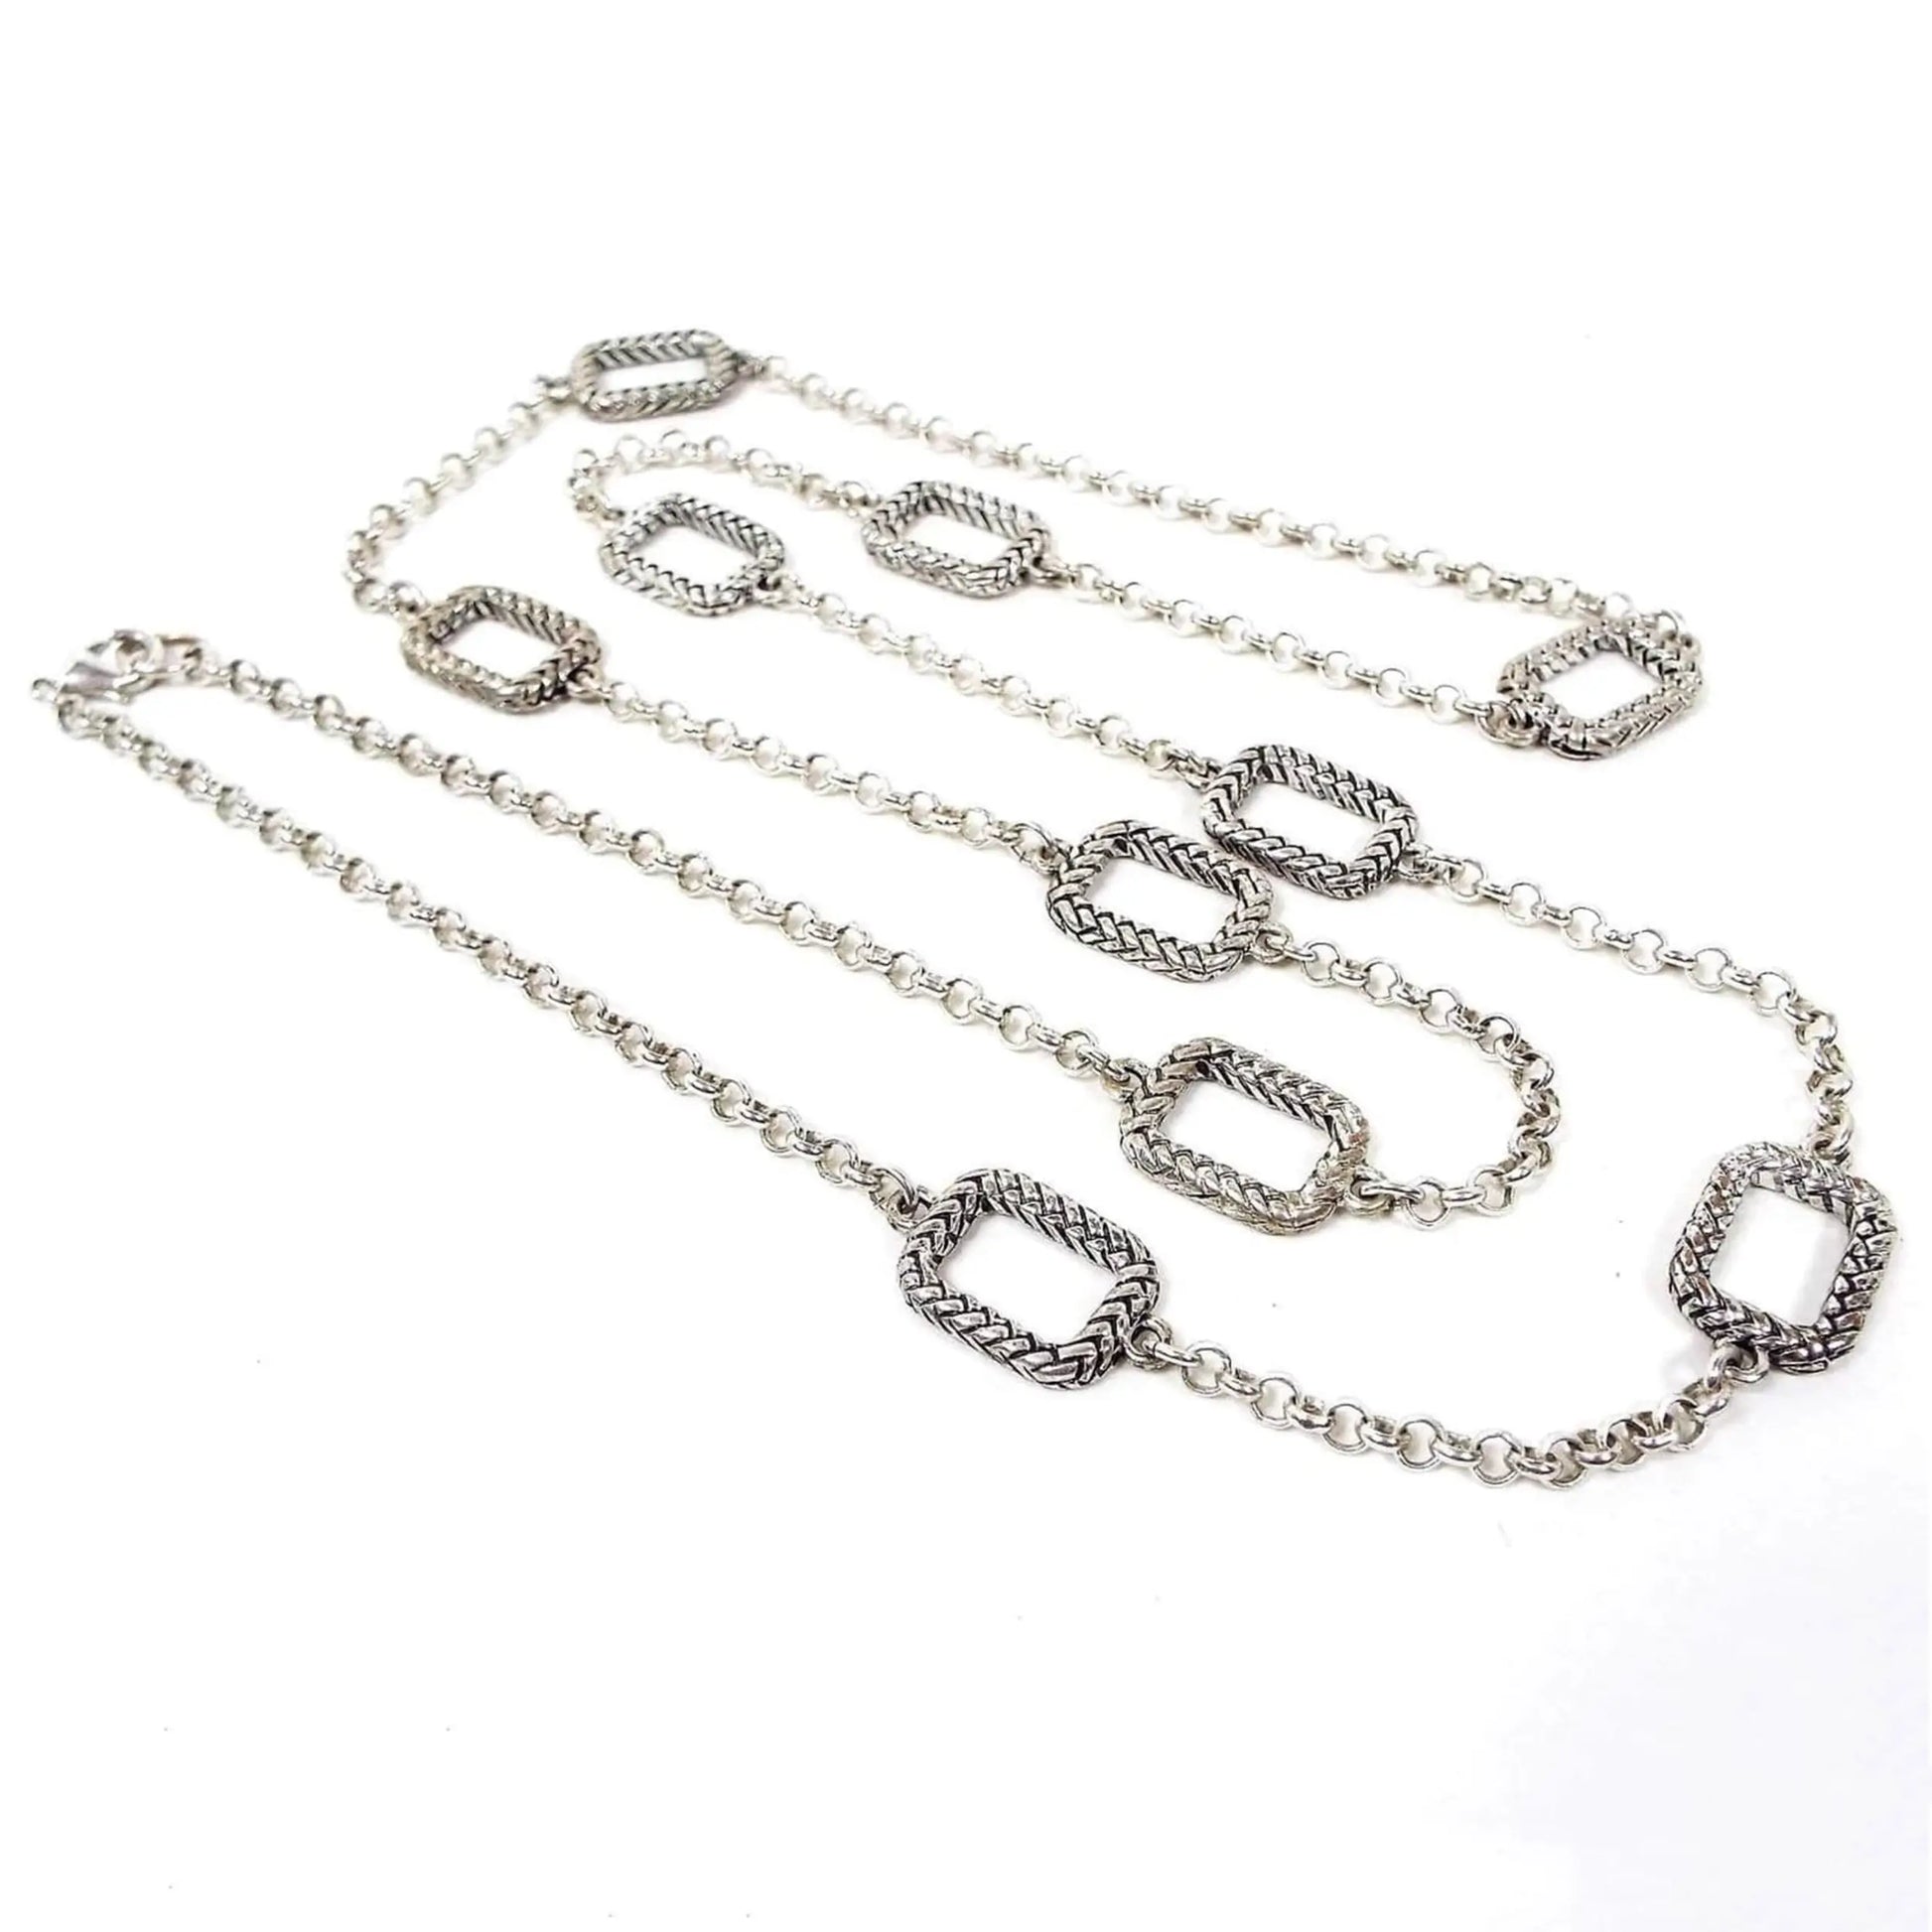 Top view of the long retro vintage chain necklace. The metal is silver tone in color. The main part of the necklace has a rolo chain link design. There are ten large rounded edge rectangles spread throughout the chain that have a textured wheat like design. There is a lobster claw clasp at the end.